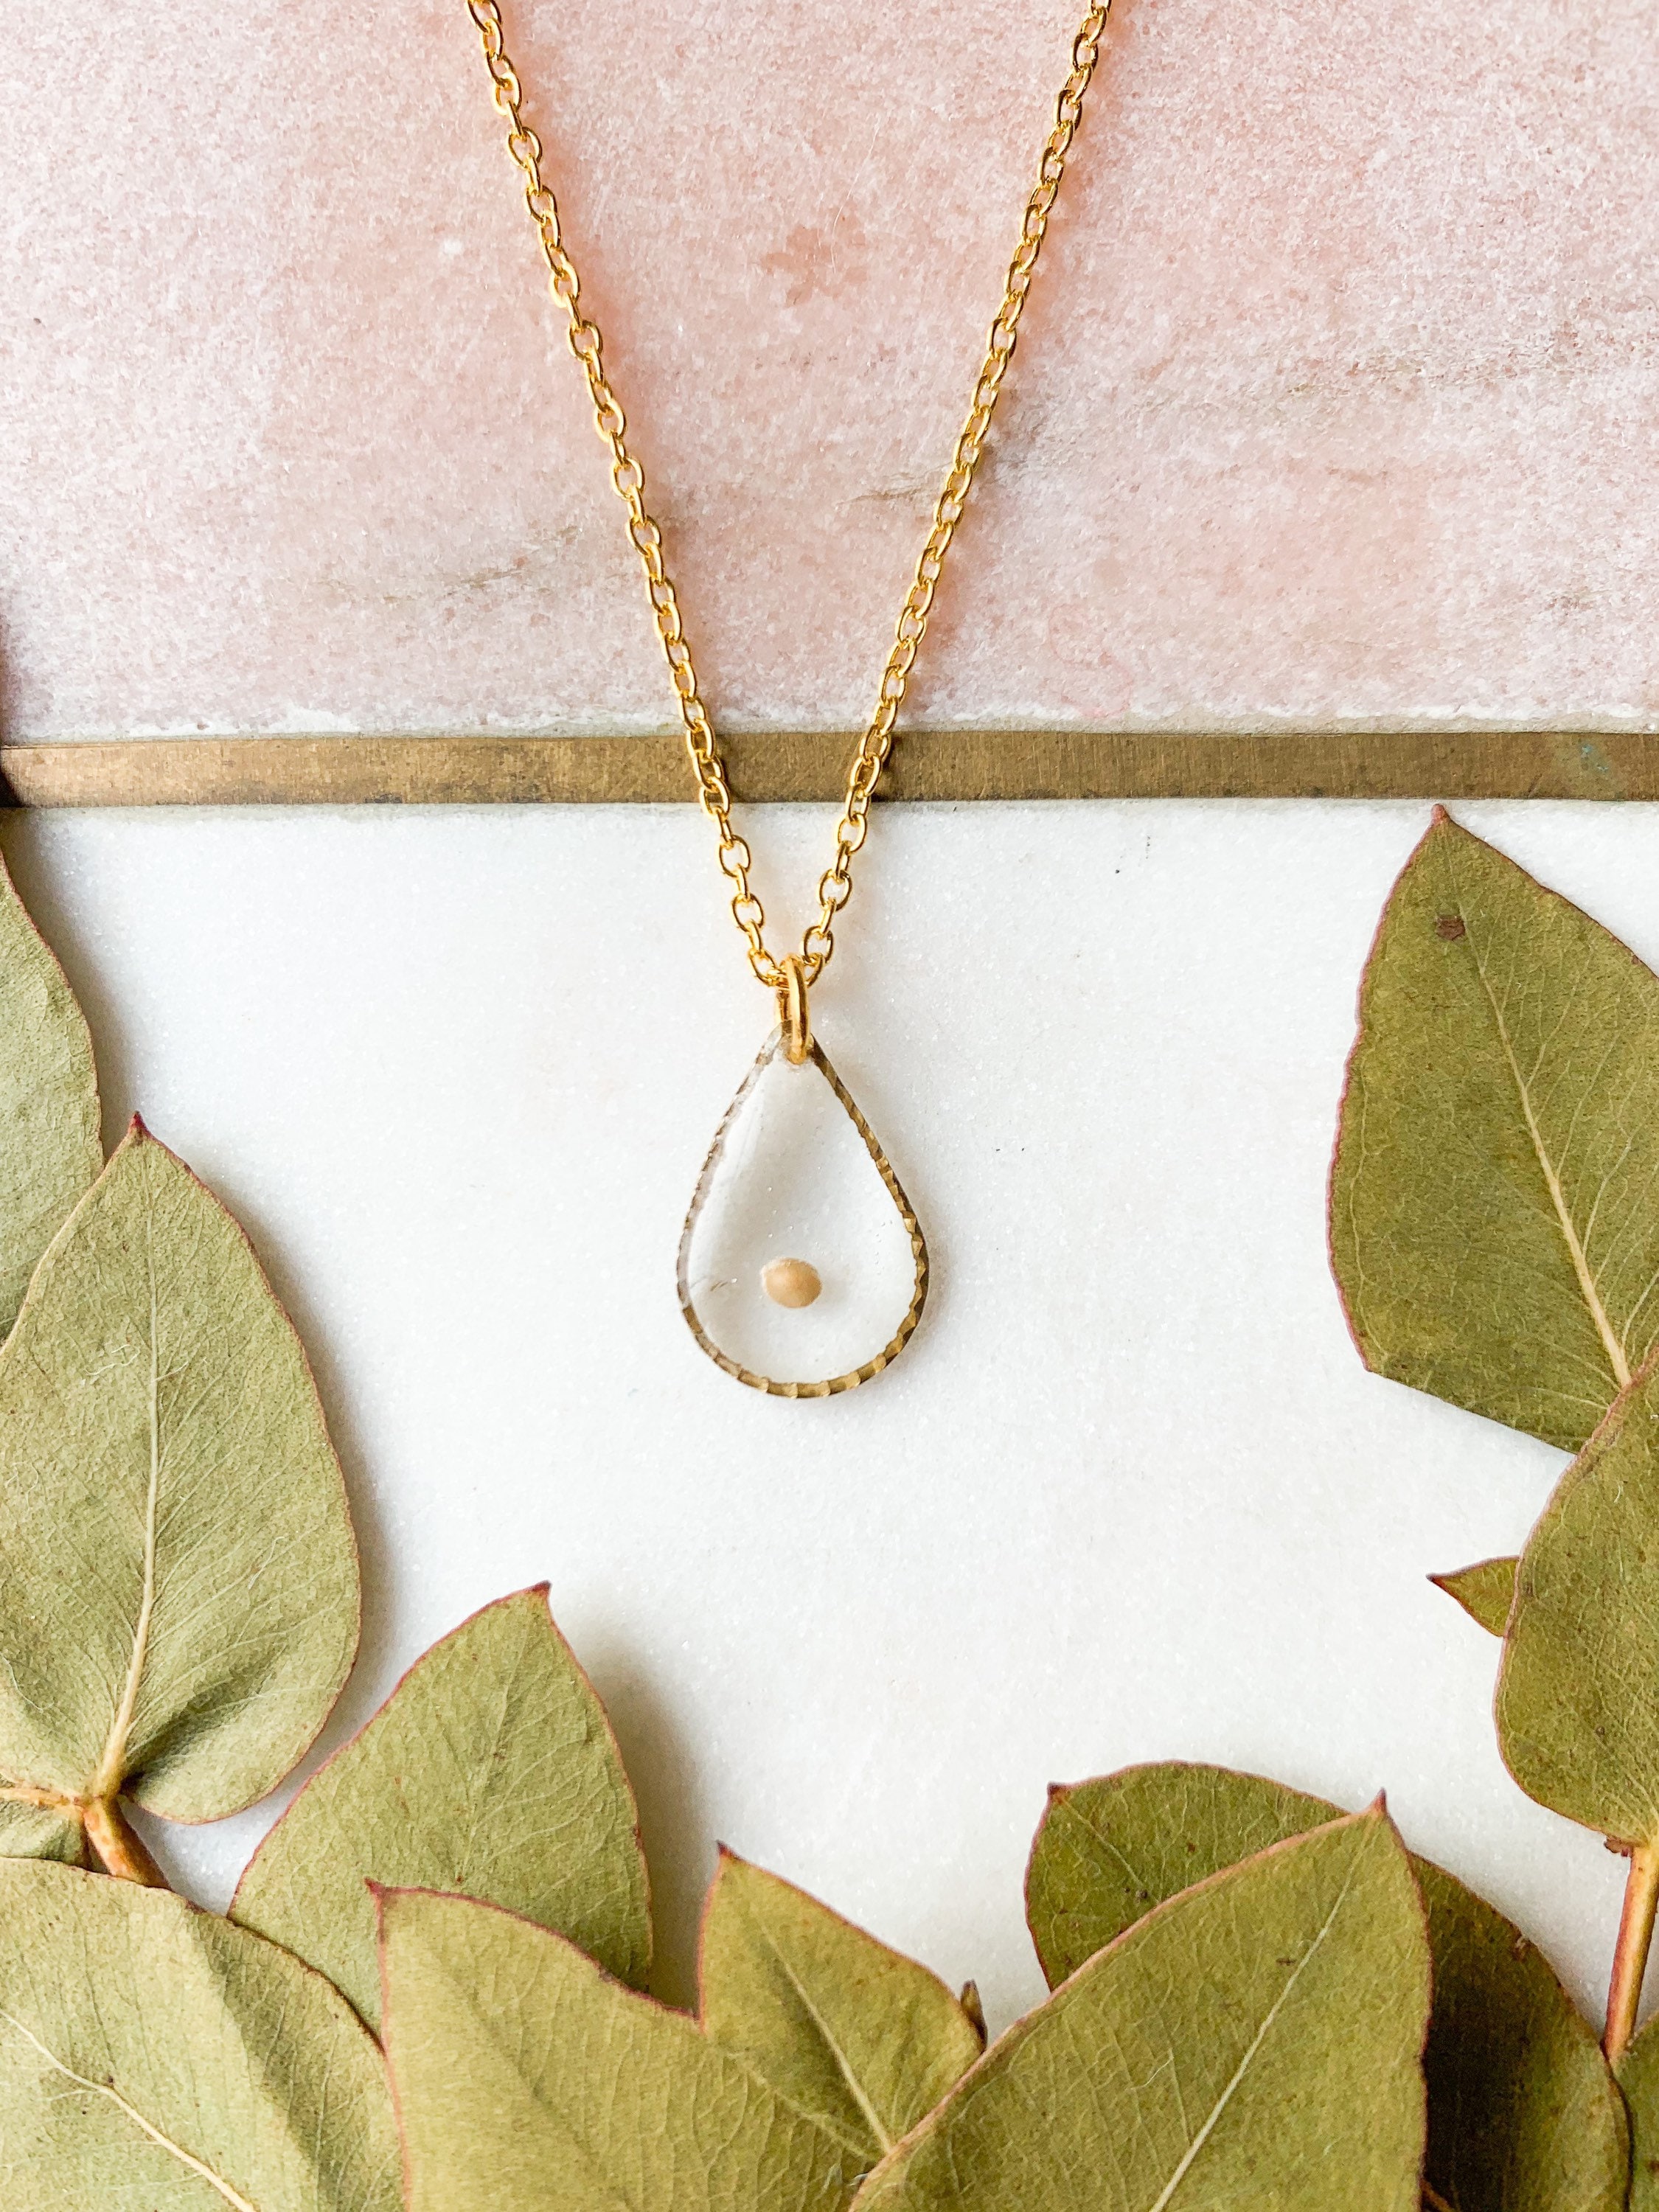 Mustard Seed Pendant Necklace, Gold Plated Chain, Botanical Jewellery, Baptism Gift